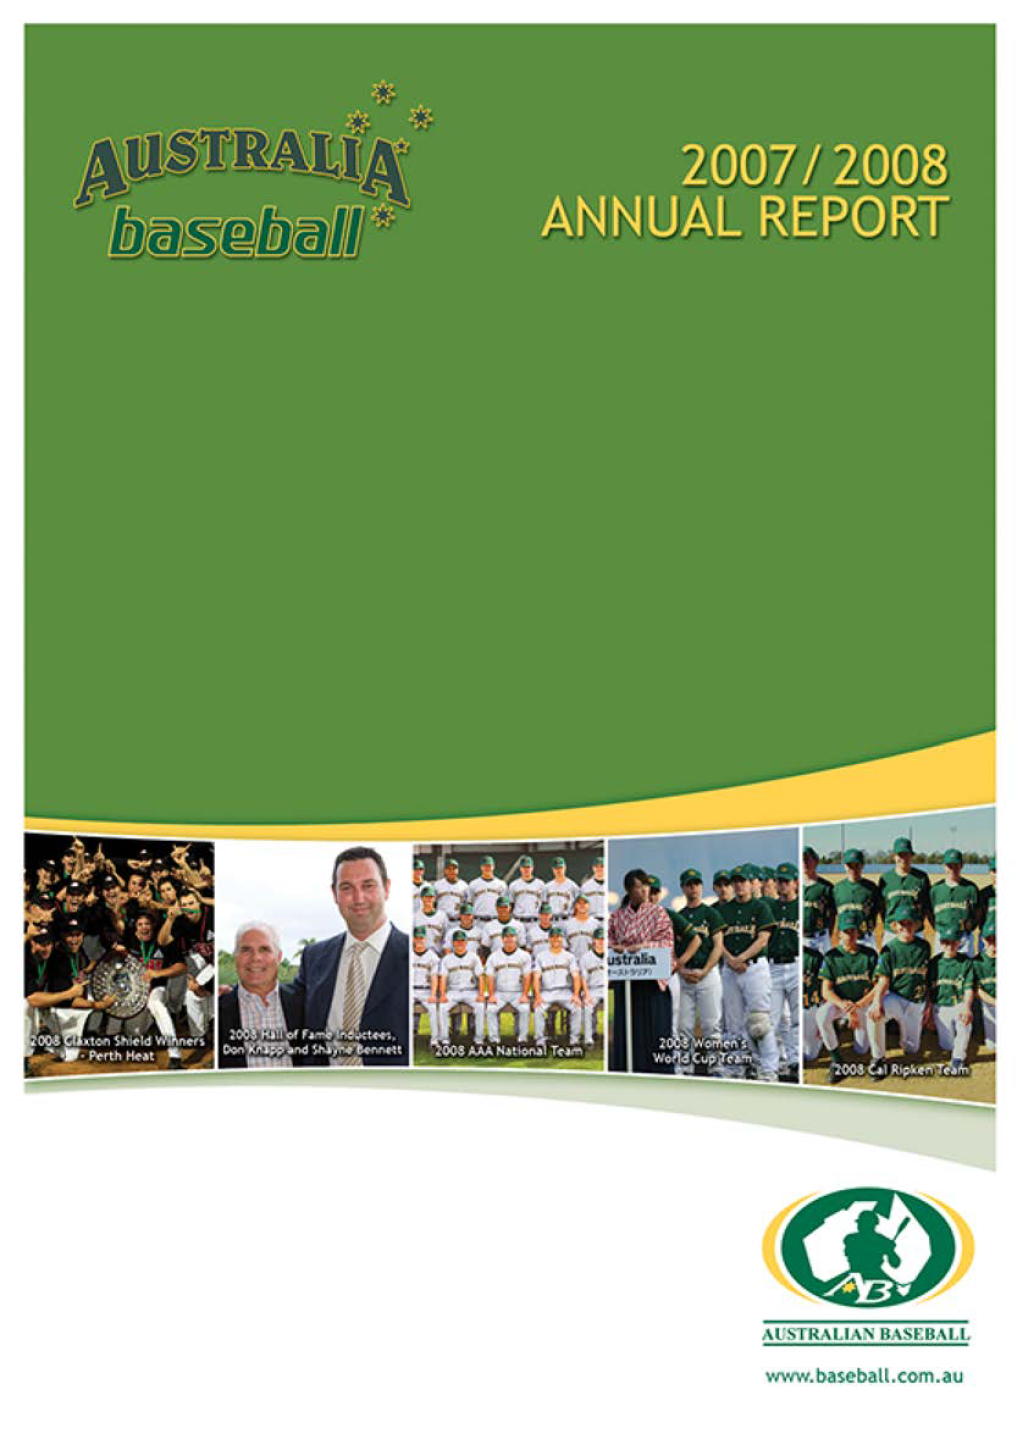 2007 / 2008 Annual Report Which Describes the Success and Challenges of Our Activities During This Last Year